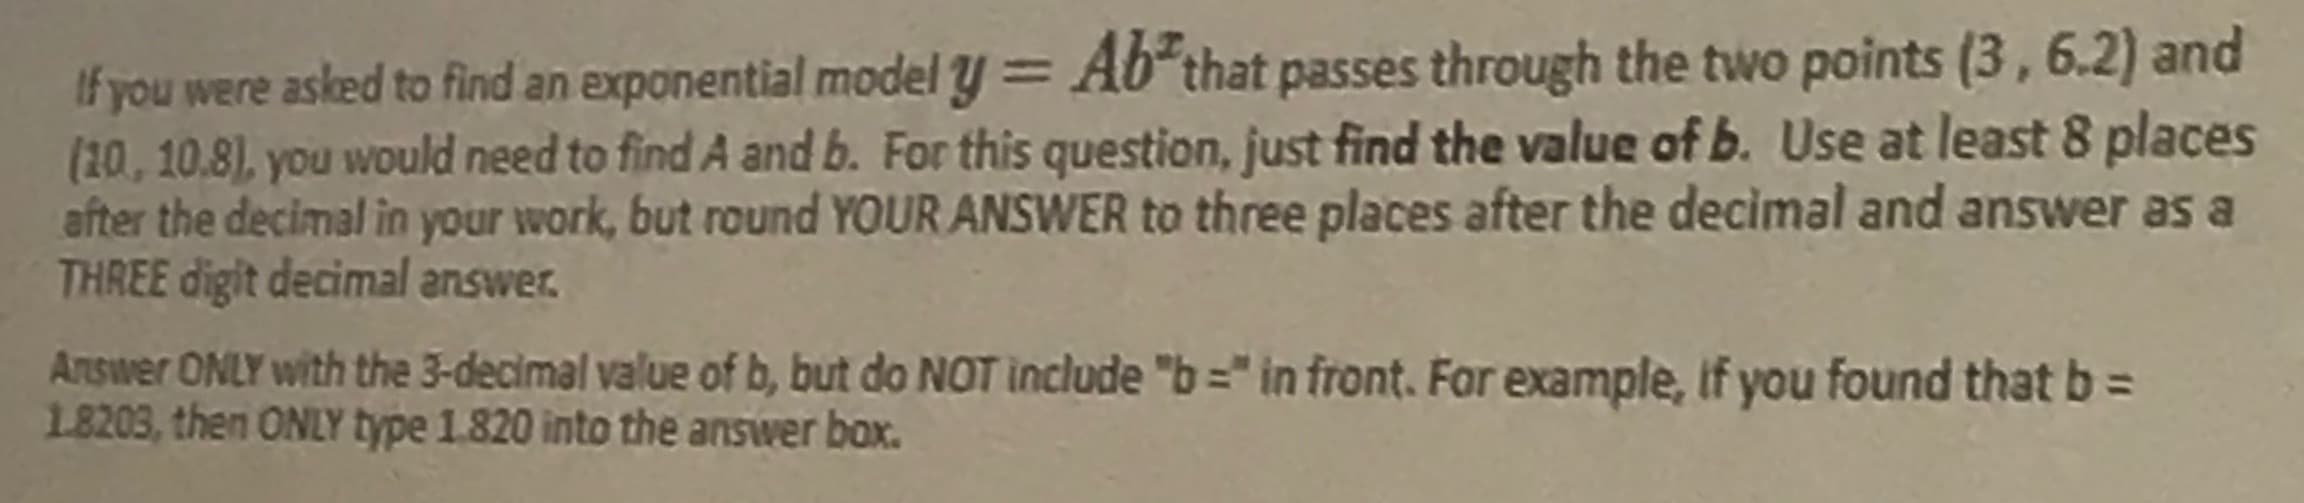 If you were asked to find an exponential model y = A6 that passes through the two points (3, 6.2) and
(20,10.8), you would need to find A and b. For this question, just find the value of b. Use at least 8 places
after the decimal in your work, but round YOUR ANSWER to three places after the decimal and answer as a
THREE digit decimal answer.
